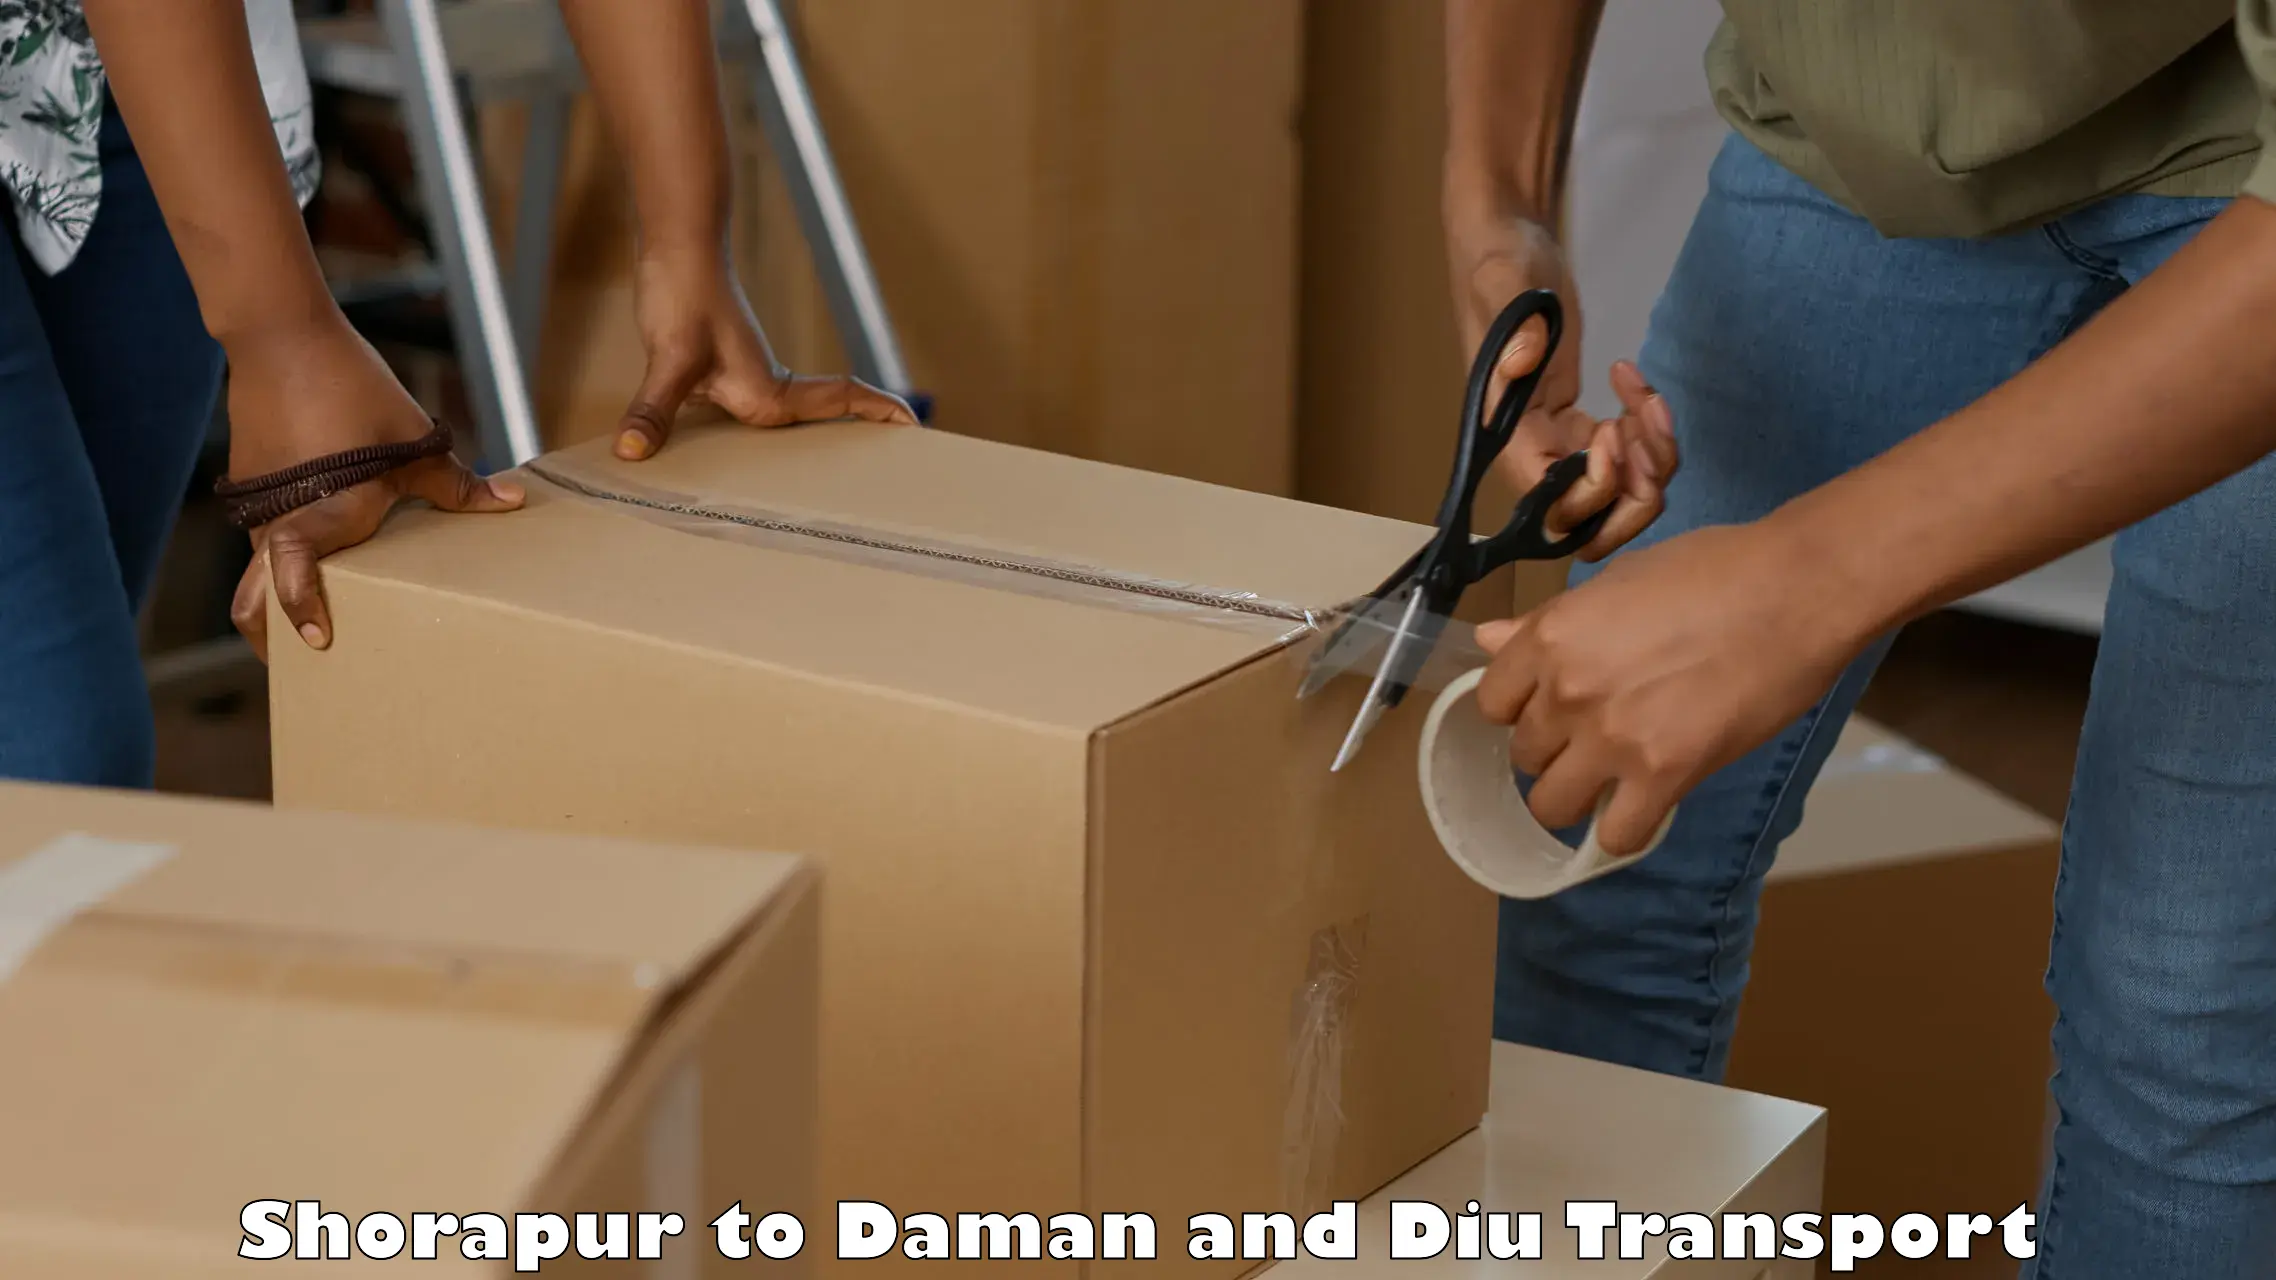 Container transport service Shorapur to Daman